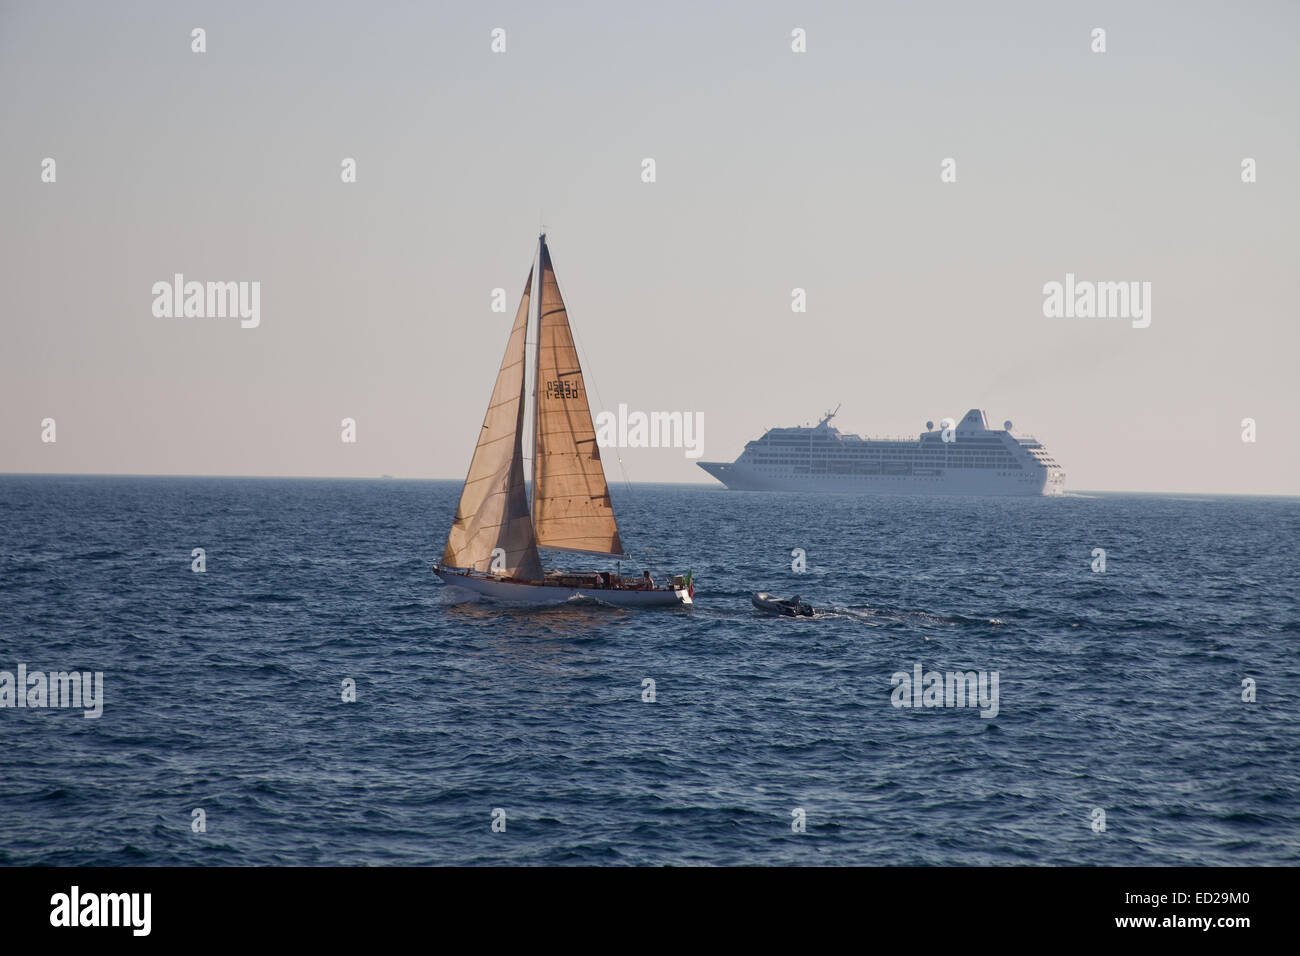 A Cruise ship dominates the horizon, and in the fore ground a yacht seems to be a more relaxed form of travel. Stock Photo